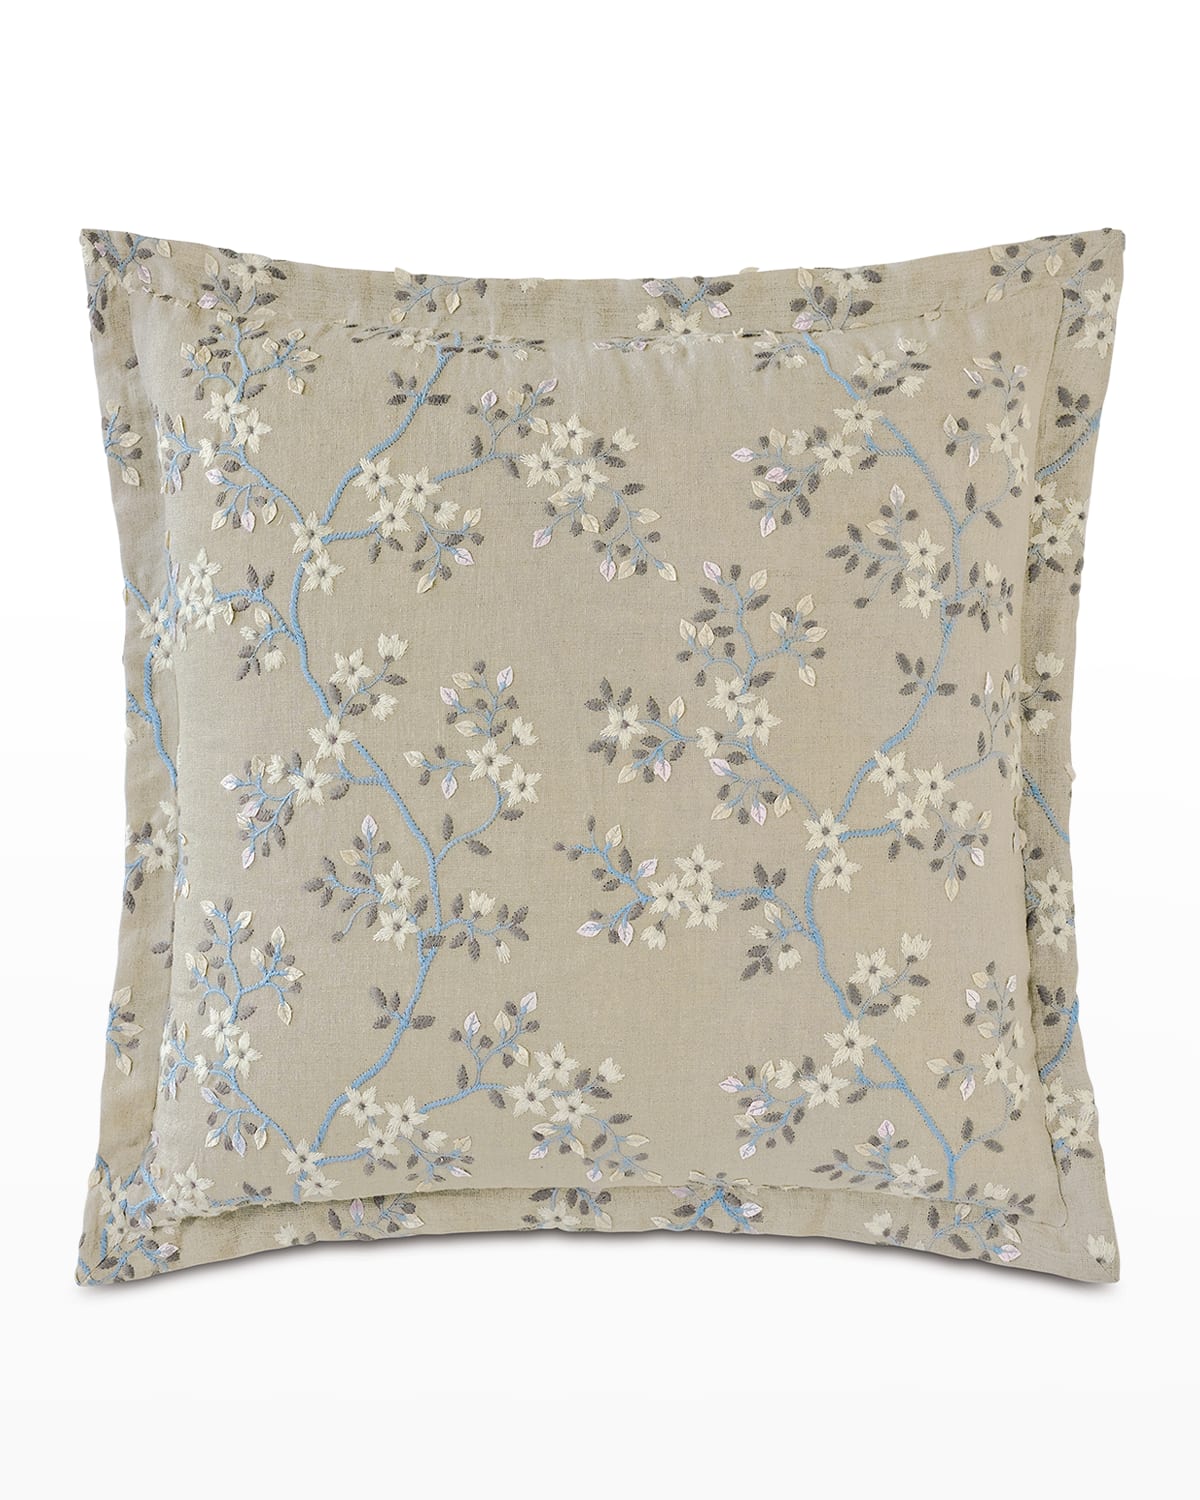 Eastern Accents Amberlynn Embroidered Petit Euro Sham